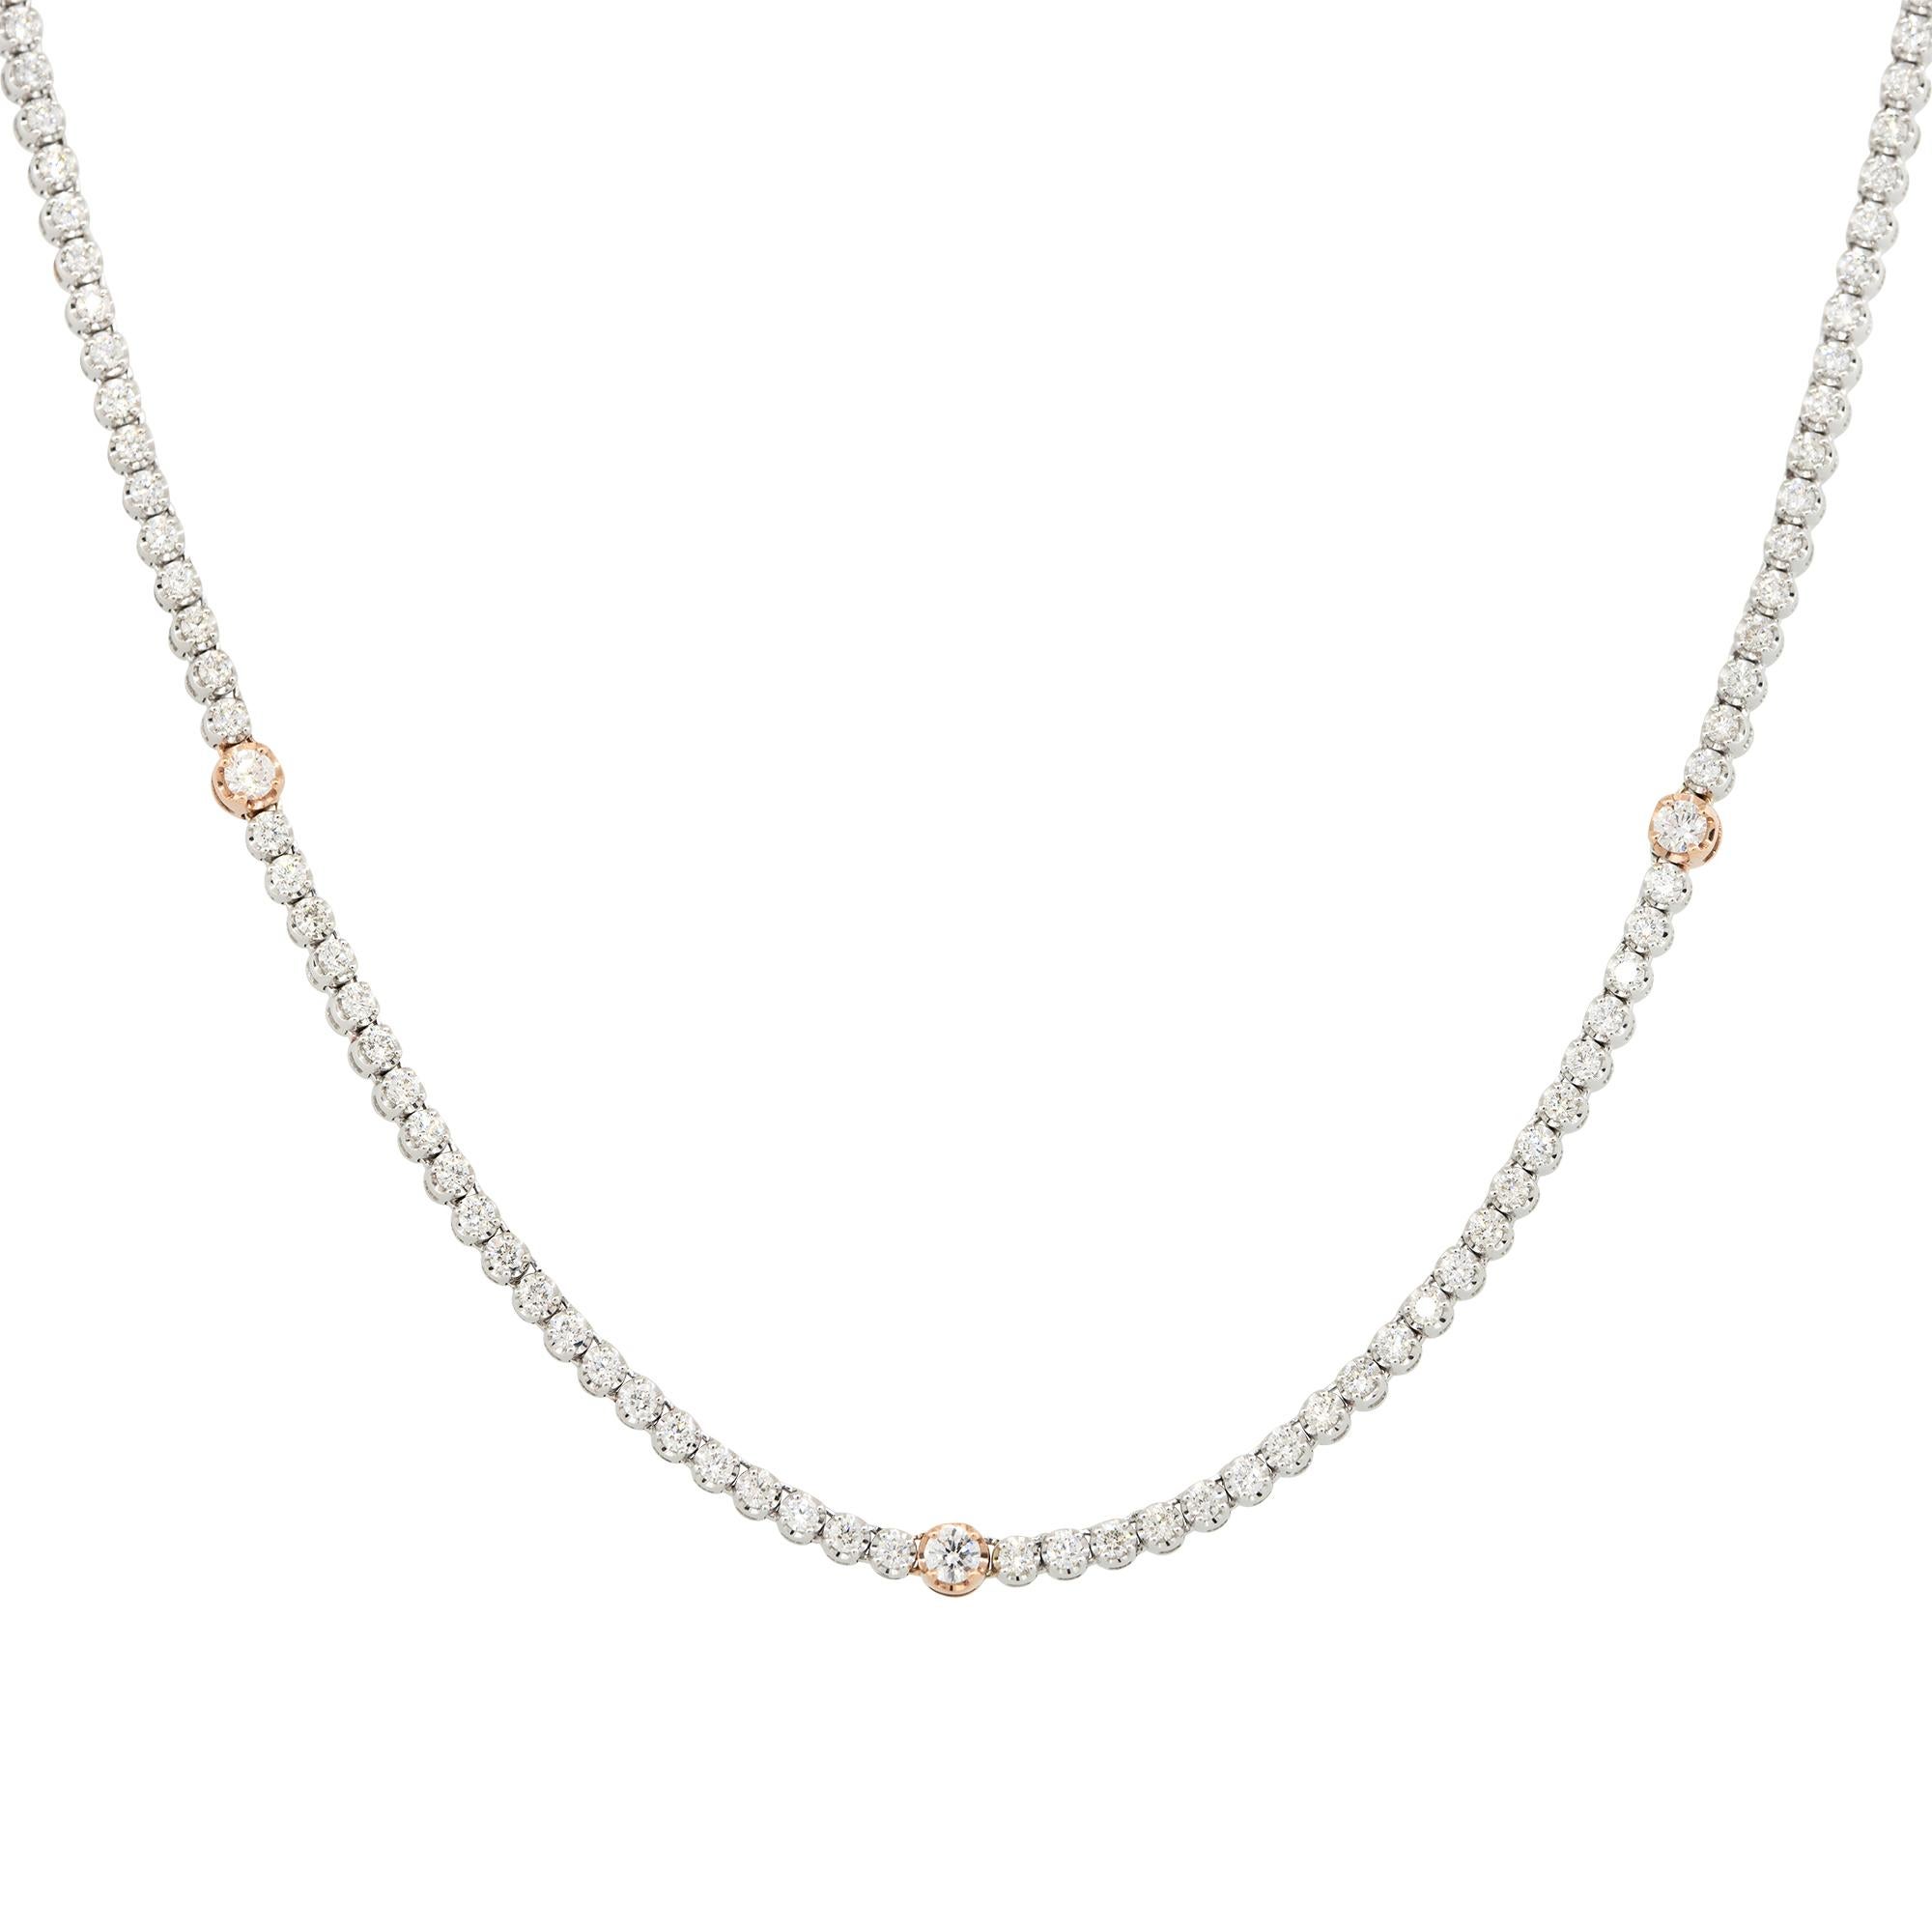 Round Cut 3.69 Carat Diamond Tennis Necklace with Diamond Stations 14 Karat in Stock For Sale